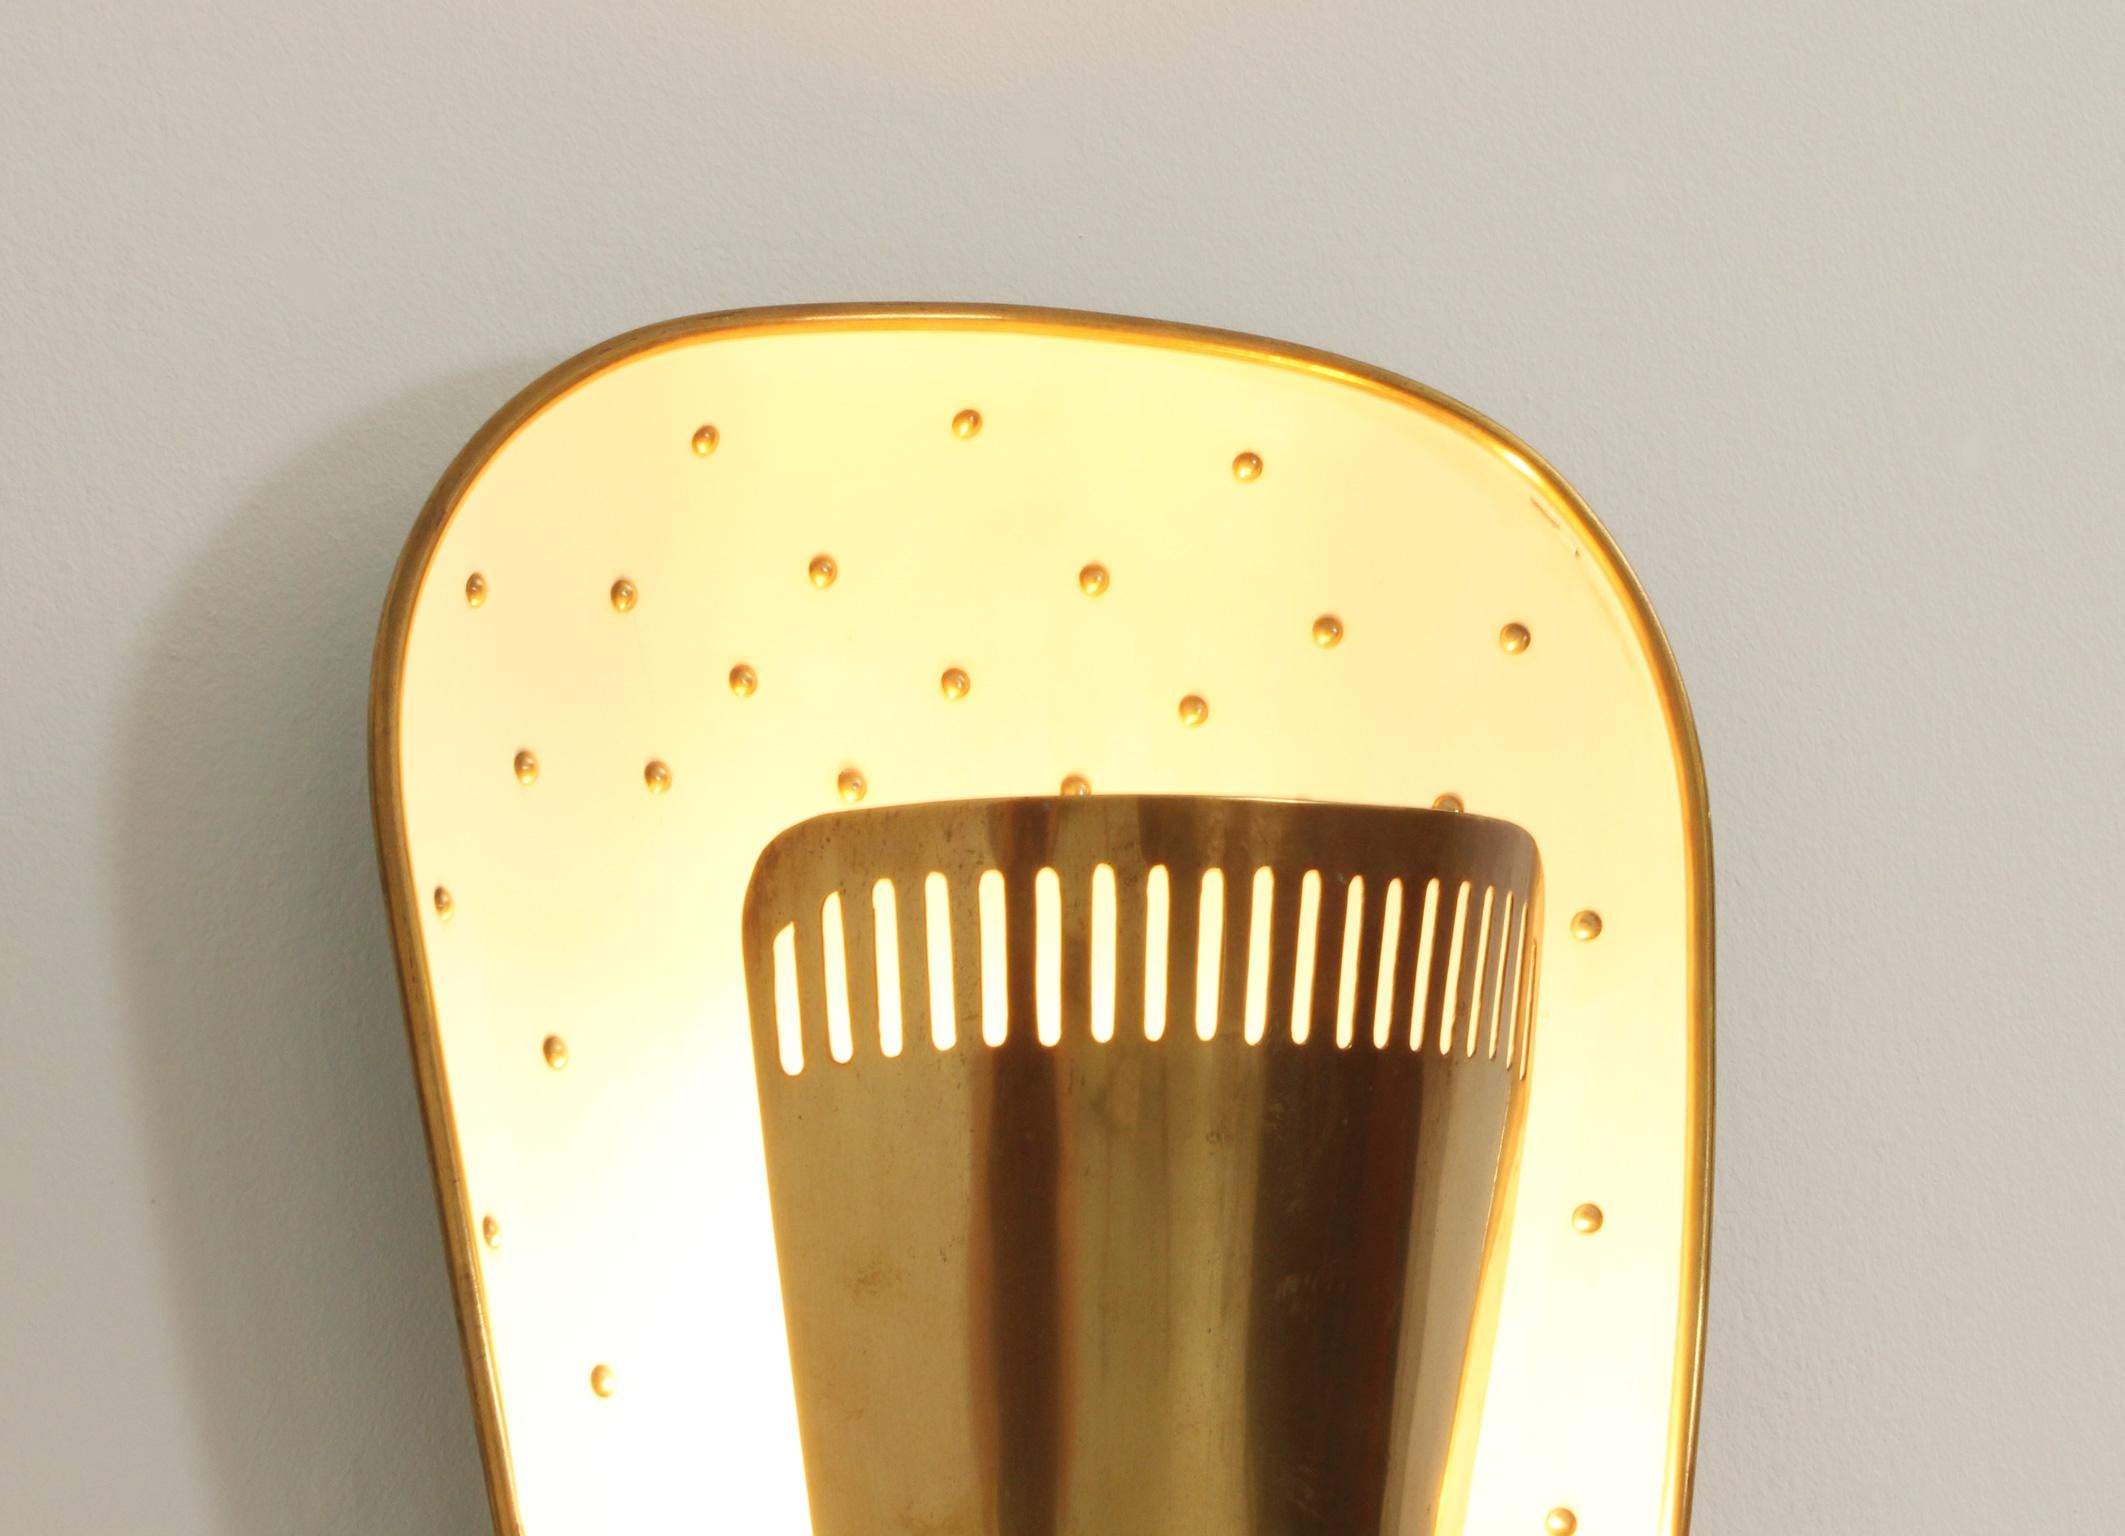 Large Midcentury Sconces Attributed to Hillebrand, Germany, 1950s For Sale 4